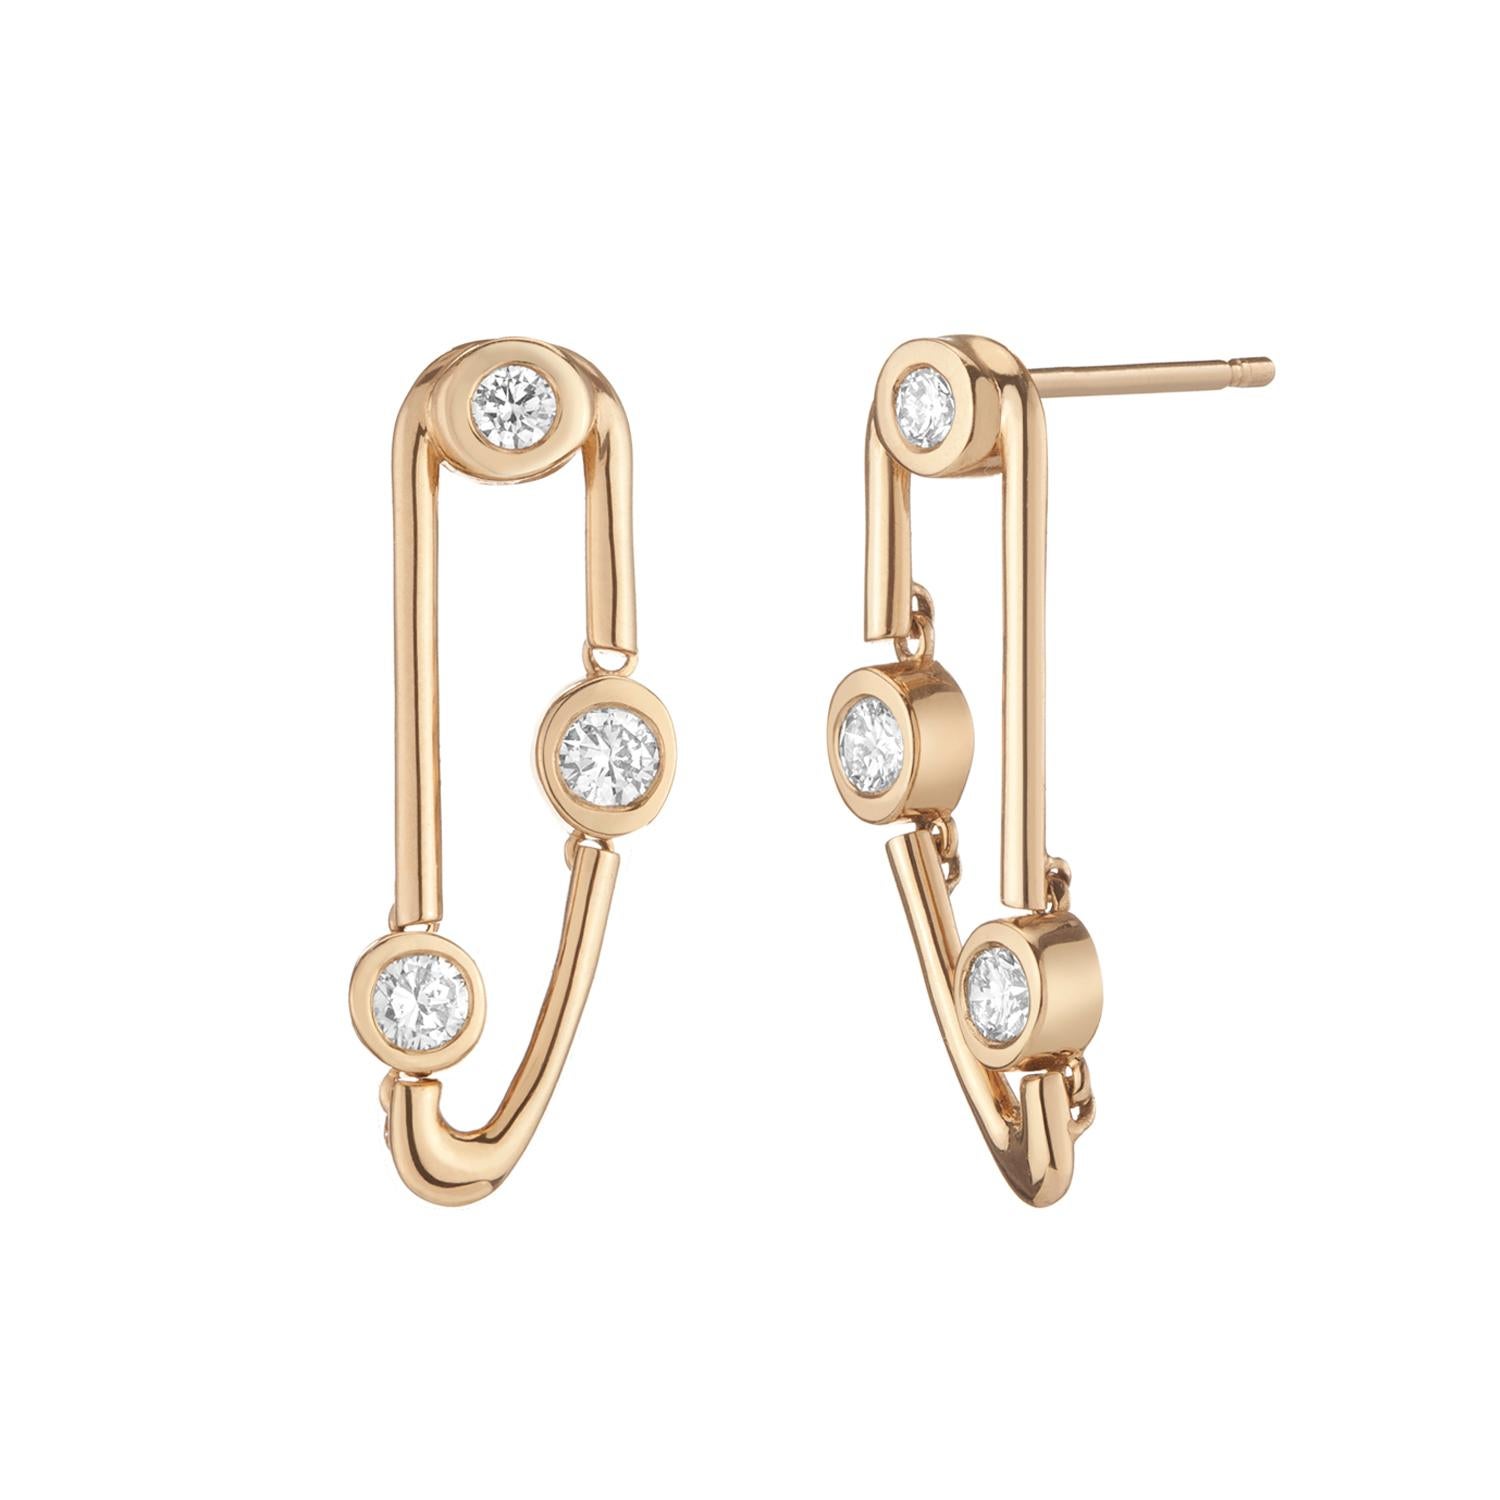 These pair of diamond left and right stud earrings are connected at 4 different spots on each earring, providing movement as you wear and move with them.

Inspired by the narrow shape of the West End area in New York City, these dangling earrings